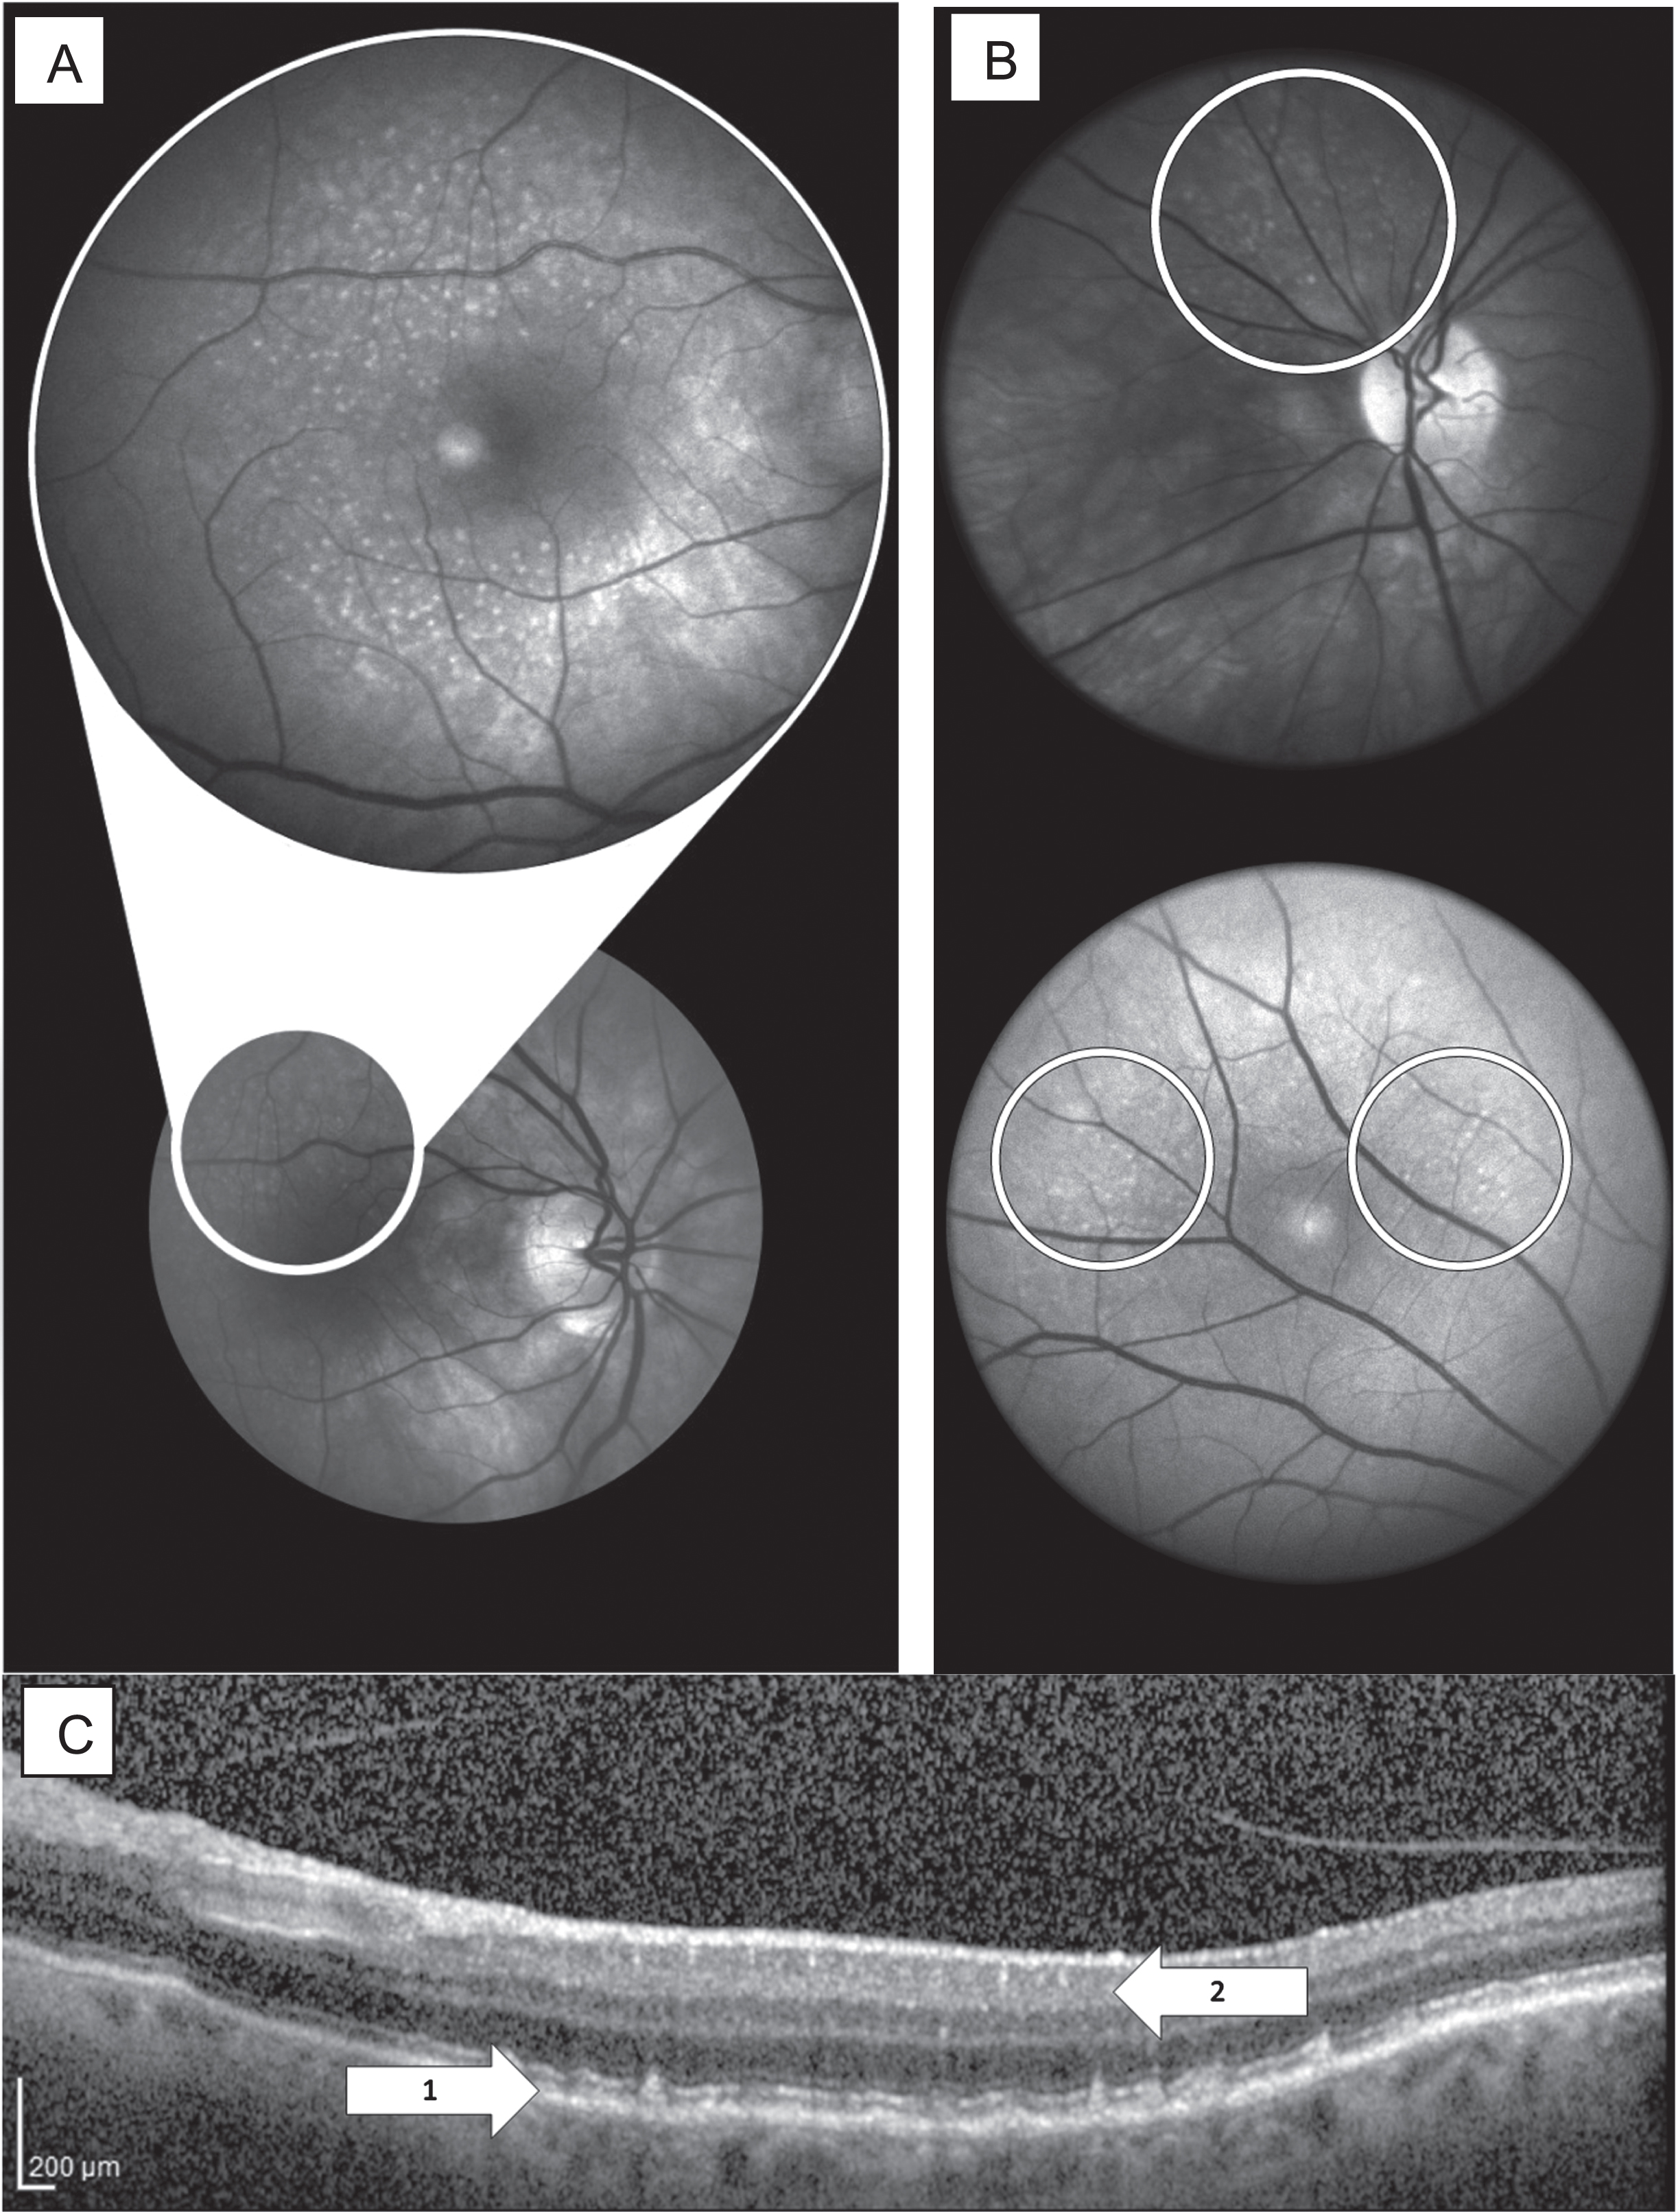 Presentation of deposits in retinal imaging. A) HSI of the retina at 575 nm displaying drusen deposits in the macular region. B) Examples of HSI between 450–580 nm showing deposits of interest outside of the macular region. C) OCT image illustrating drusen deposition in and between the RPE and Bruch’s membrane retinal layers (1). Note: According to literature, the layers of deposition for Aβ are in superior layers, including the RNFL, GCL, and IPL (2) [14], [54]. HSI, hyperspectral imaging; OCT, optical coherence tomography; RPE, retinal pigment epithelium; RNFL, retinal nerve fiber layer; GCL, ganglion cell layer; IPL, inner plexiform layer.